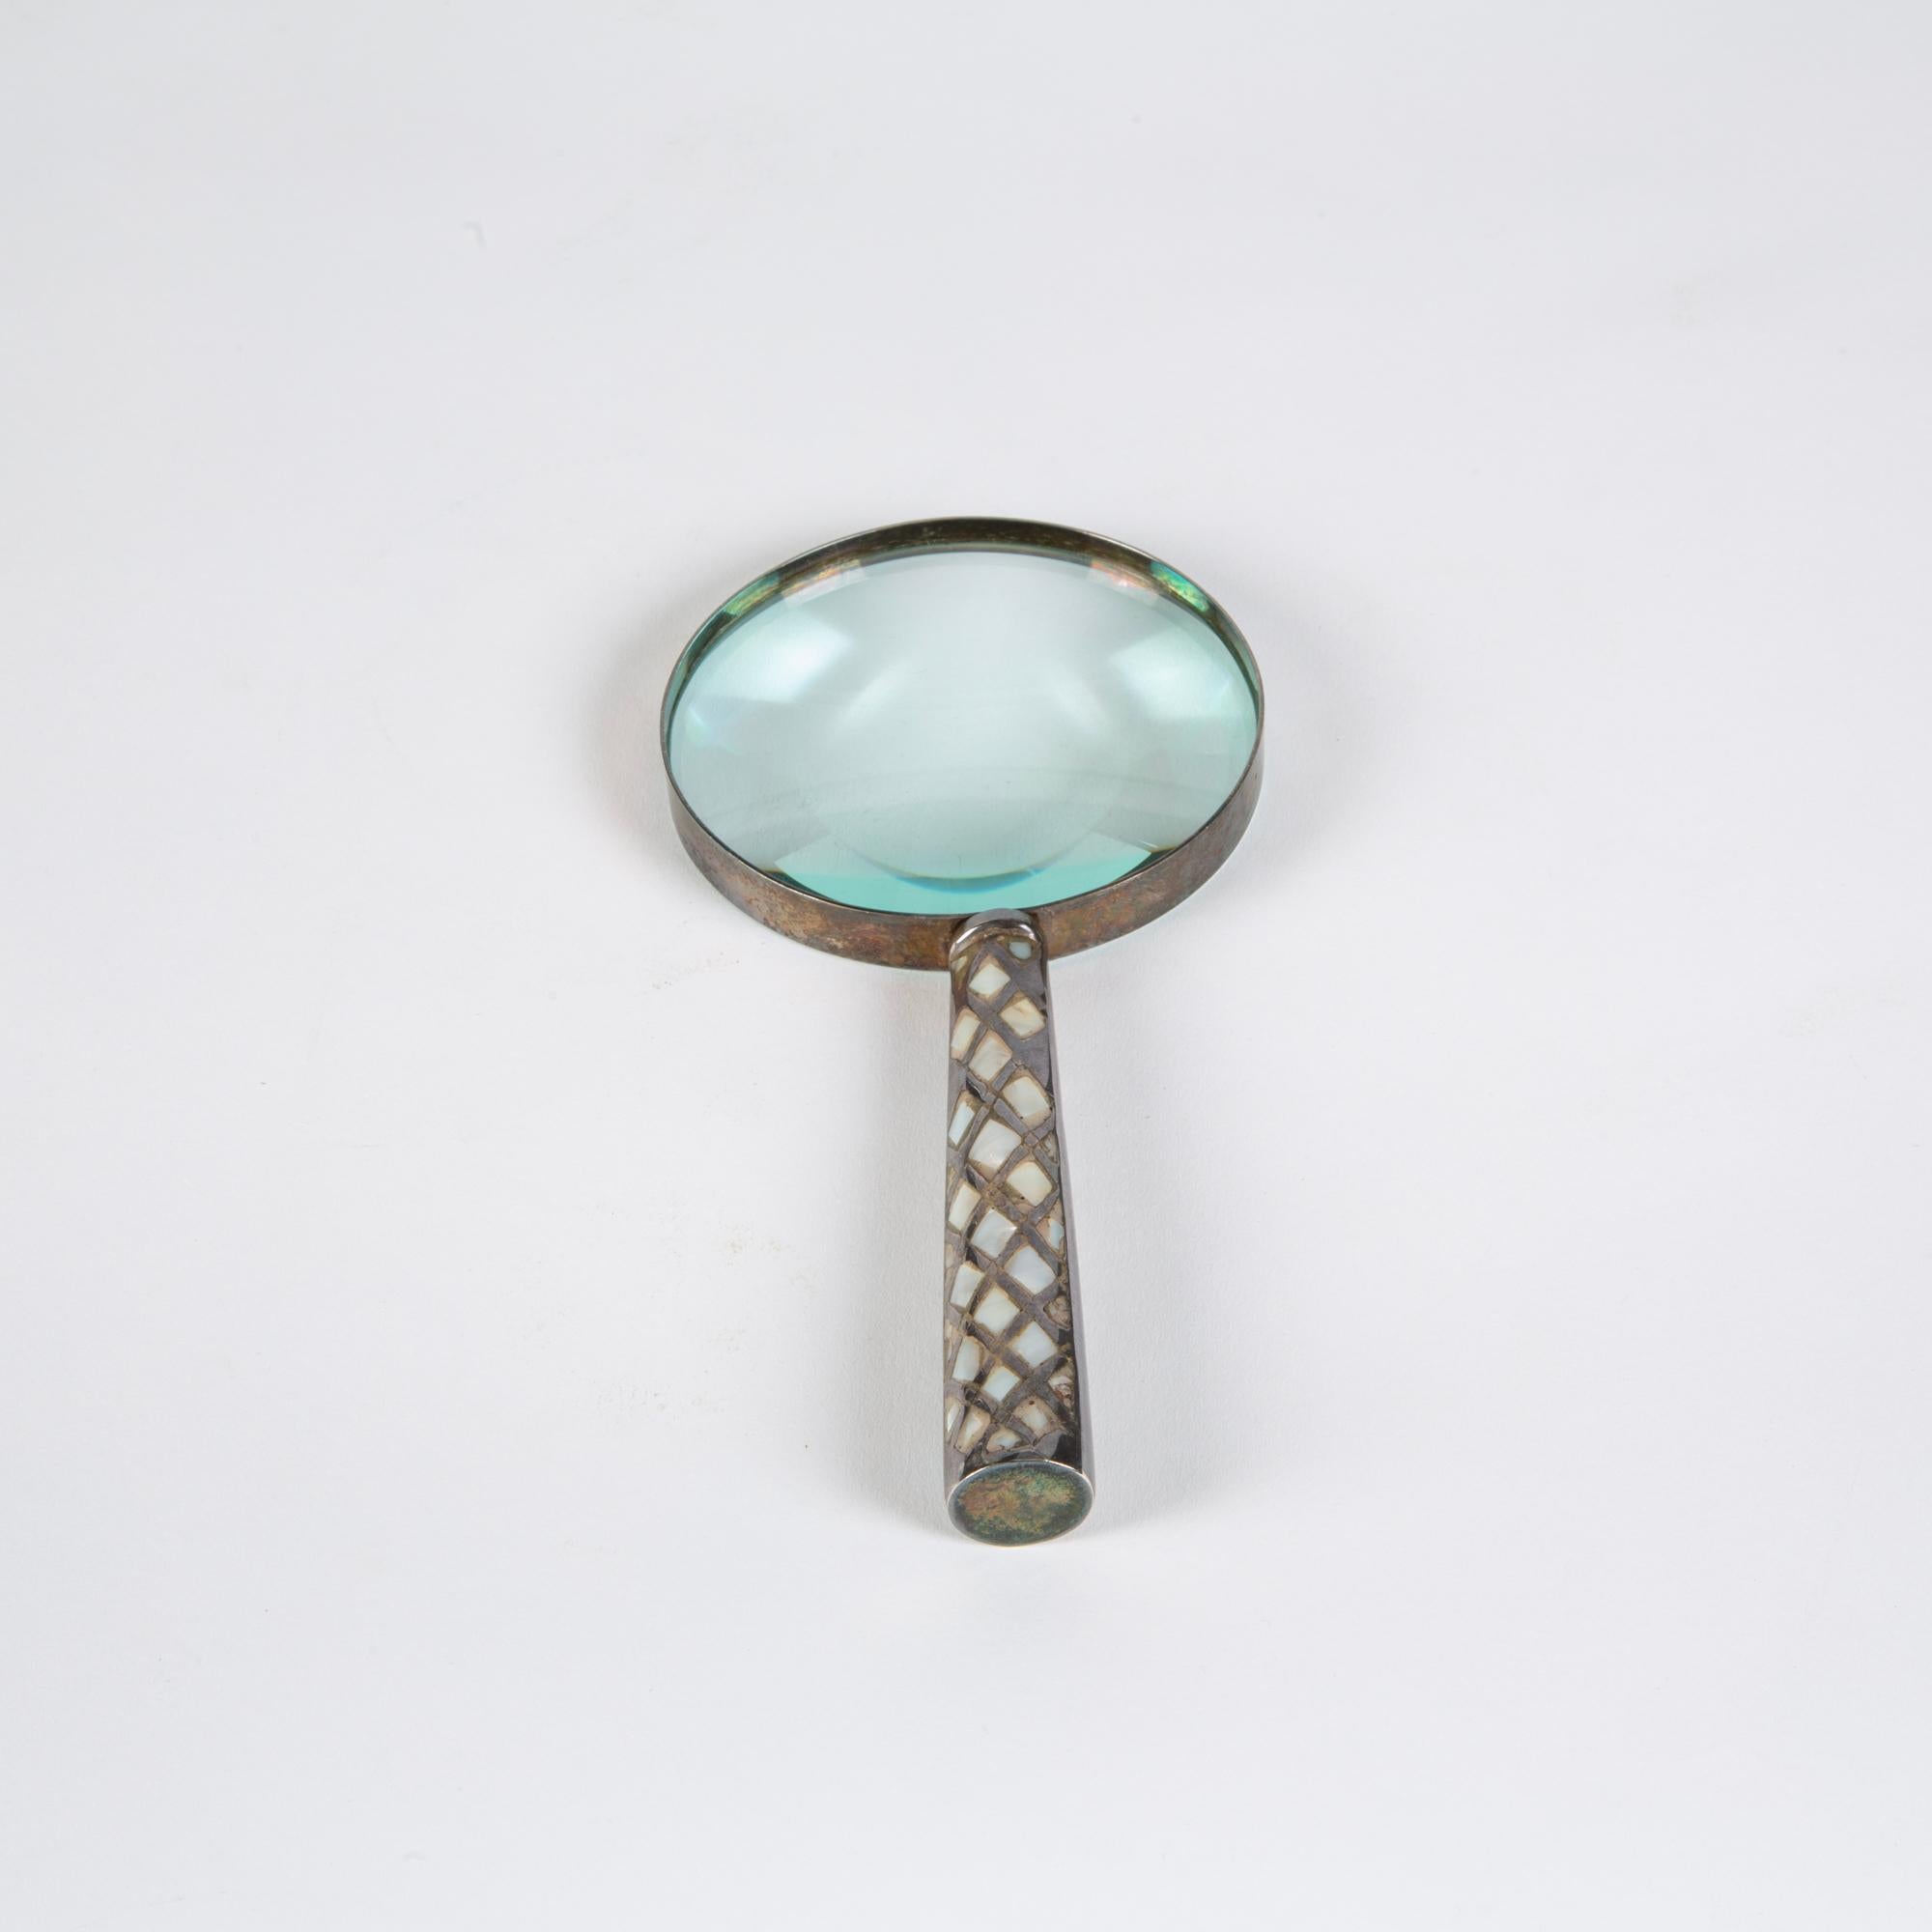 Patinated silver metal frame magnifying glass. The handle features a geometric pattern of inlaid mother of pearl. It is a great finishing piece in your library or fun coffee table décor.

Dimensions: 9?